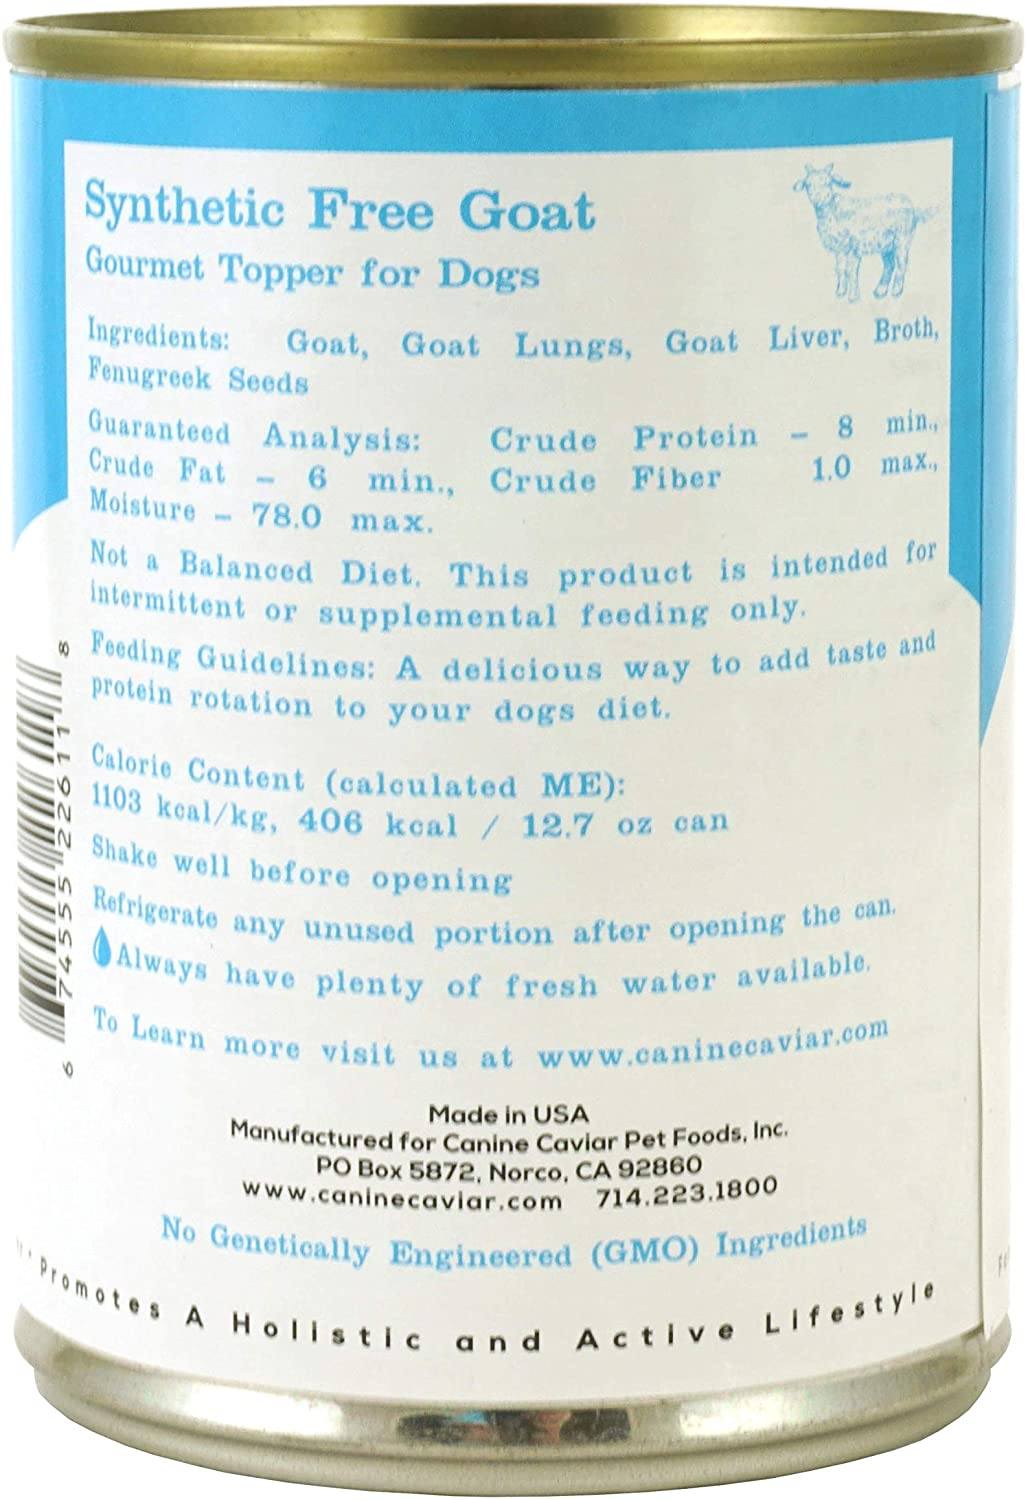 Canine Caviar Synthetic Free and Grain Free Goat Canned Dog Food - 12.7 oz - Case of 12  